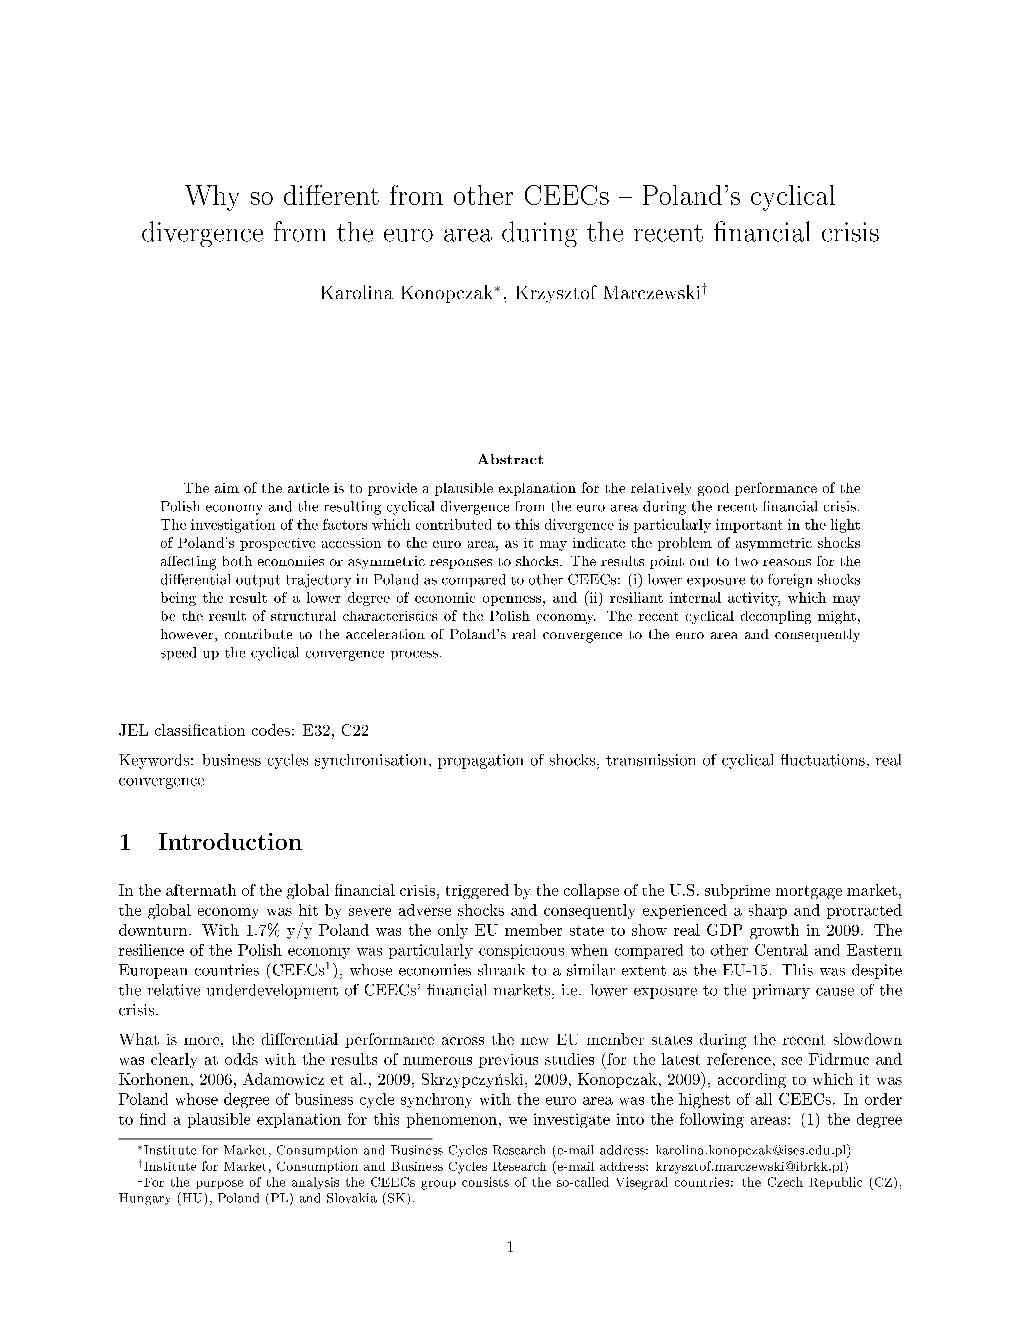 Why So Di Erent from Other Ceecs Poland's Cyclical Divergence From